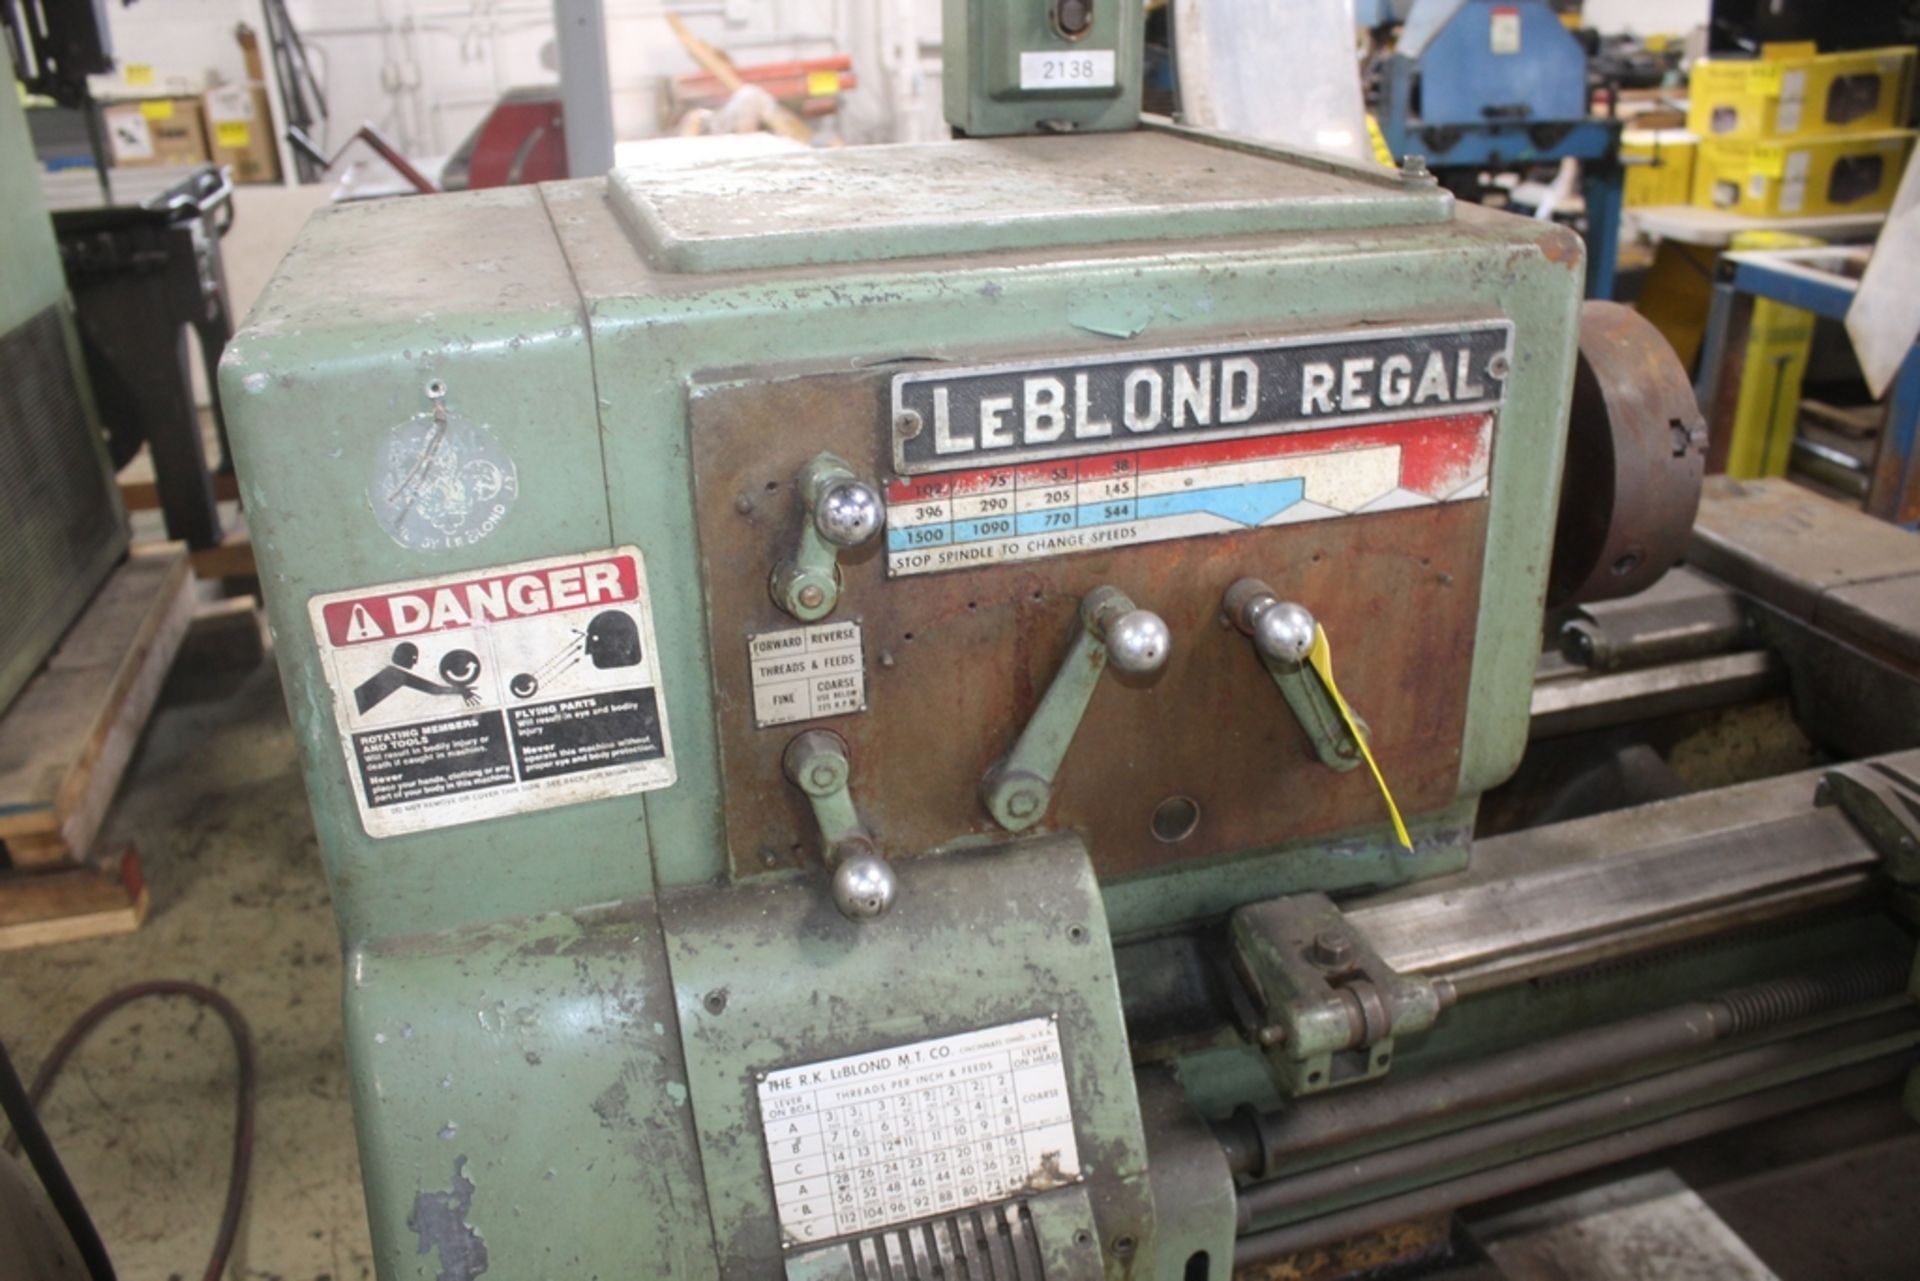 LEBLOND 19”X54” MODEL REGAL TOOLROOM LATHE, S/N 2F876, 1500 SPINDLE RPM, WITH 8” 3-JAW CHUCK, INCH - Image 3 of 6